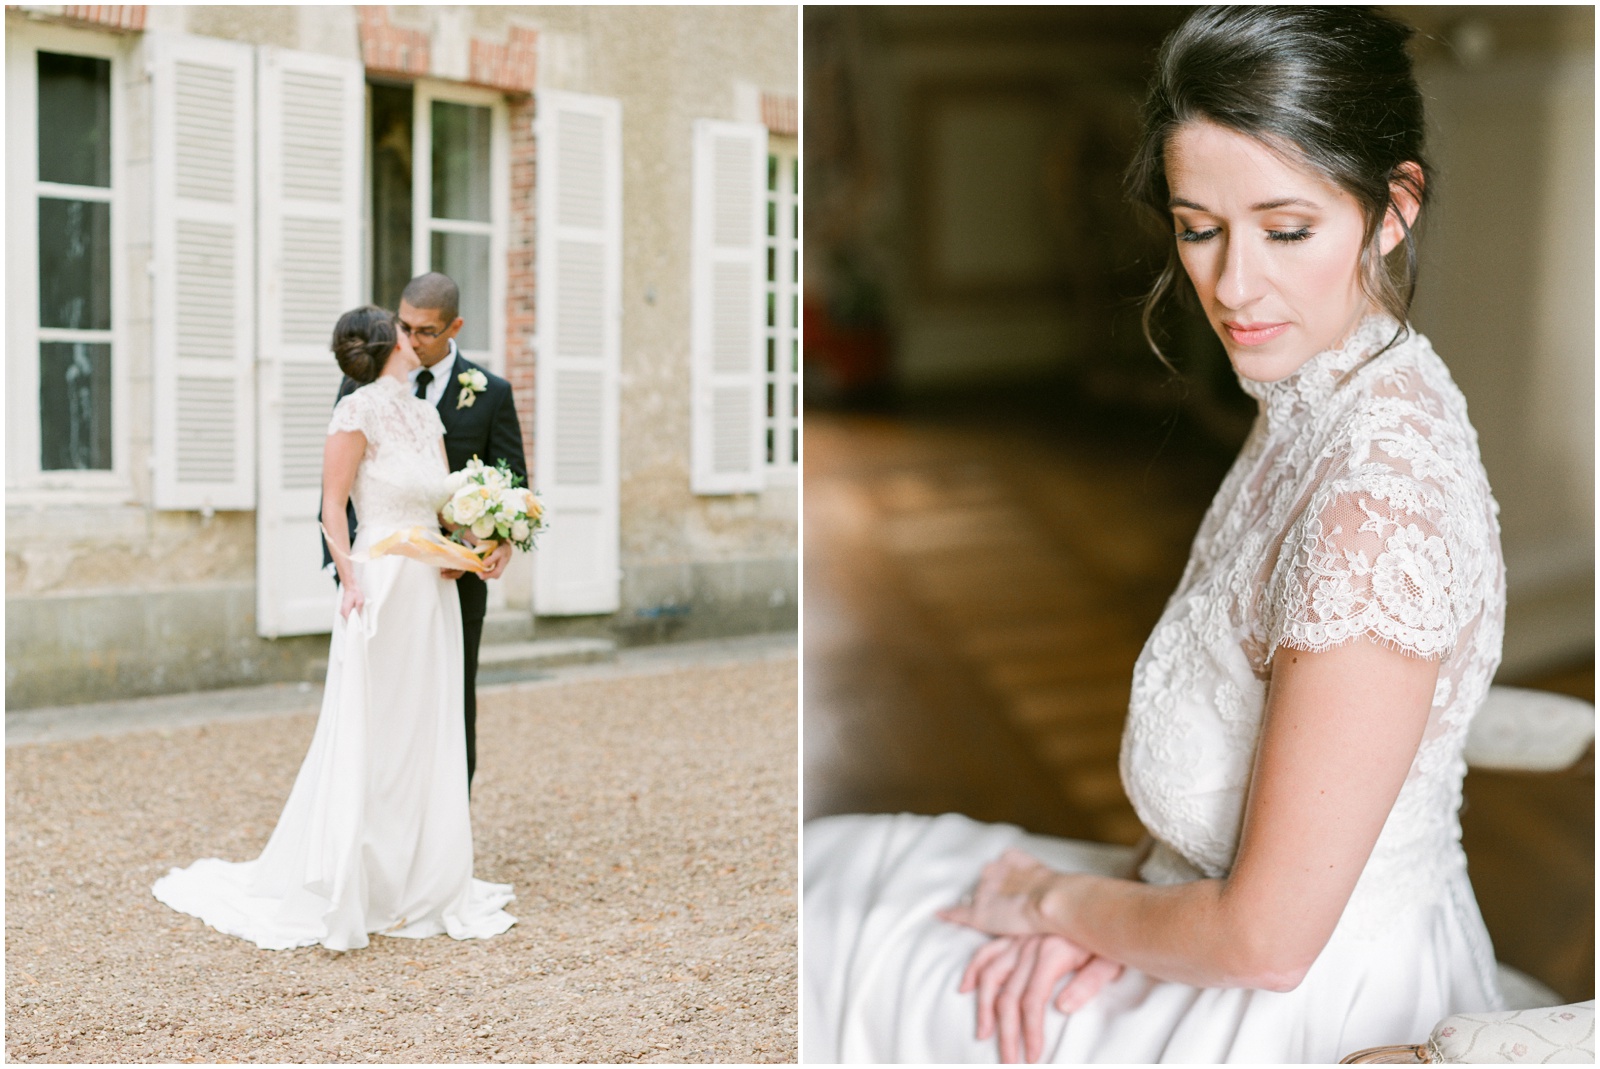 Elopement at a French chateau